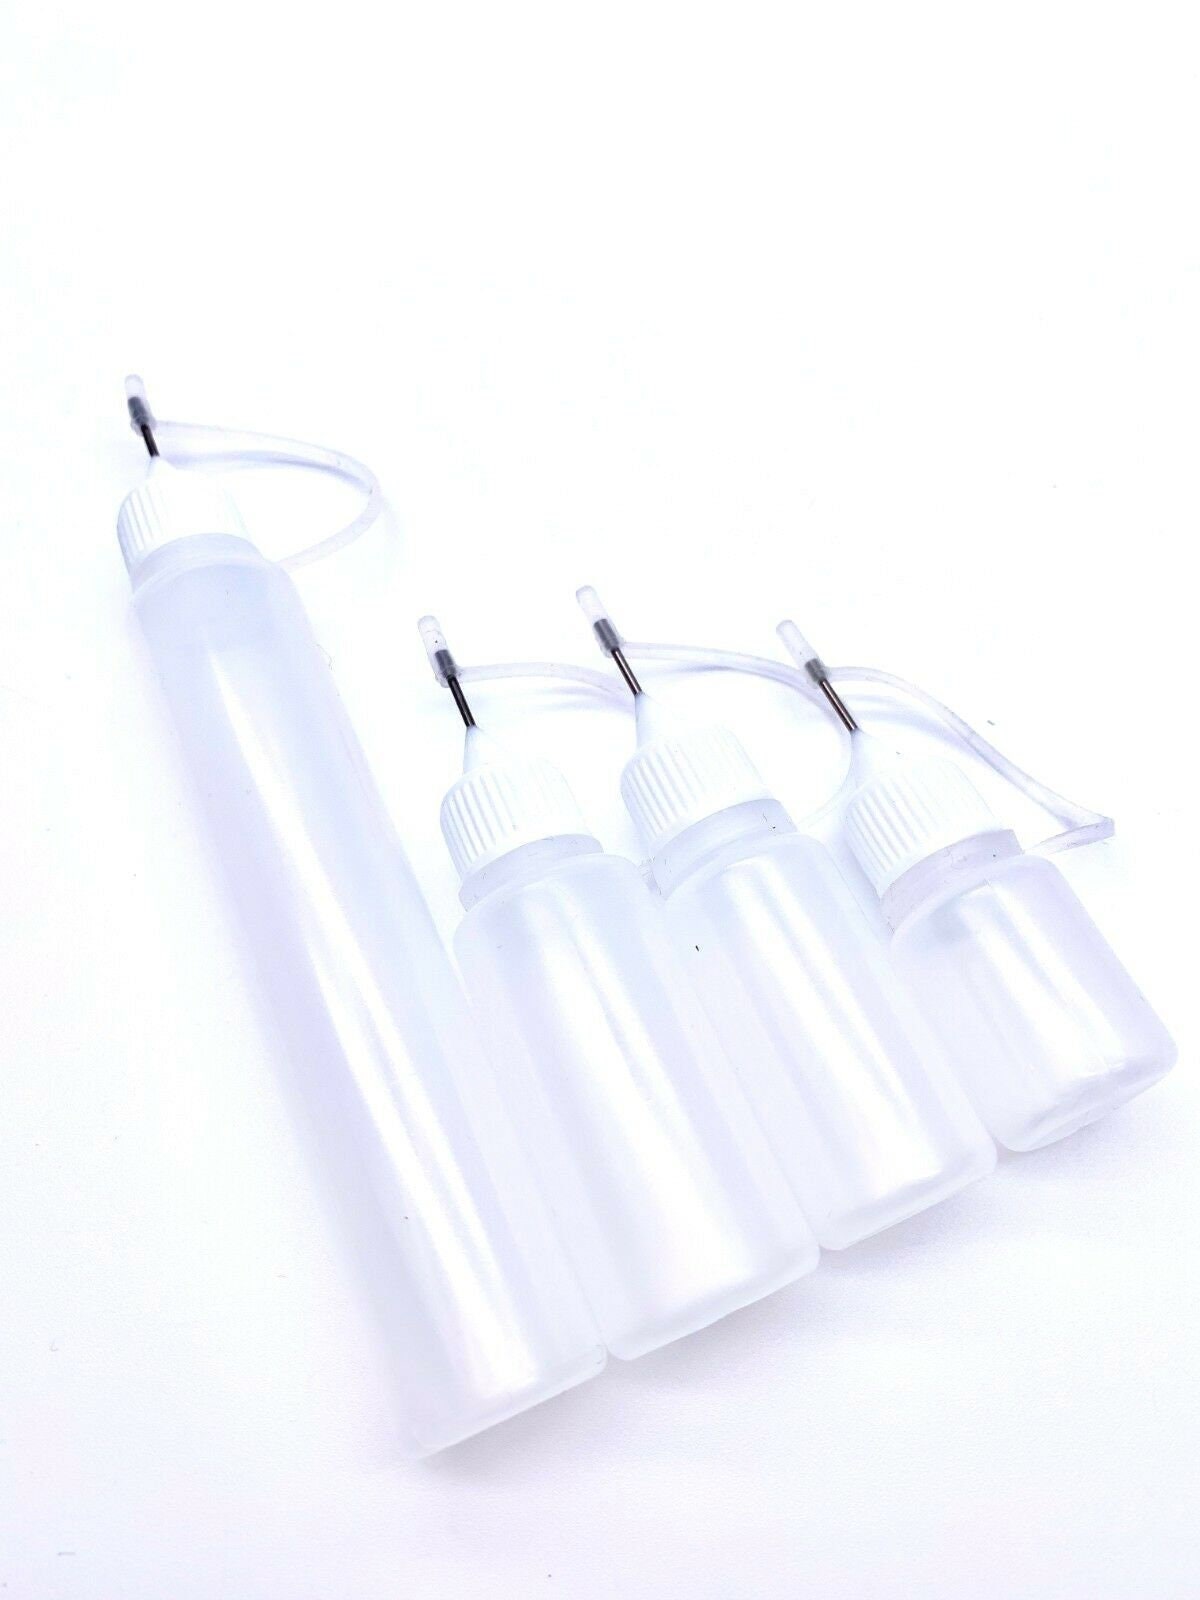 Gem-tac Glue for Crystal Applying Needle Precision Tip Bottle for Clothing  Crafts Projects Banner Making 10ml 